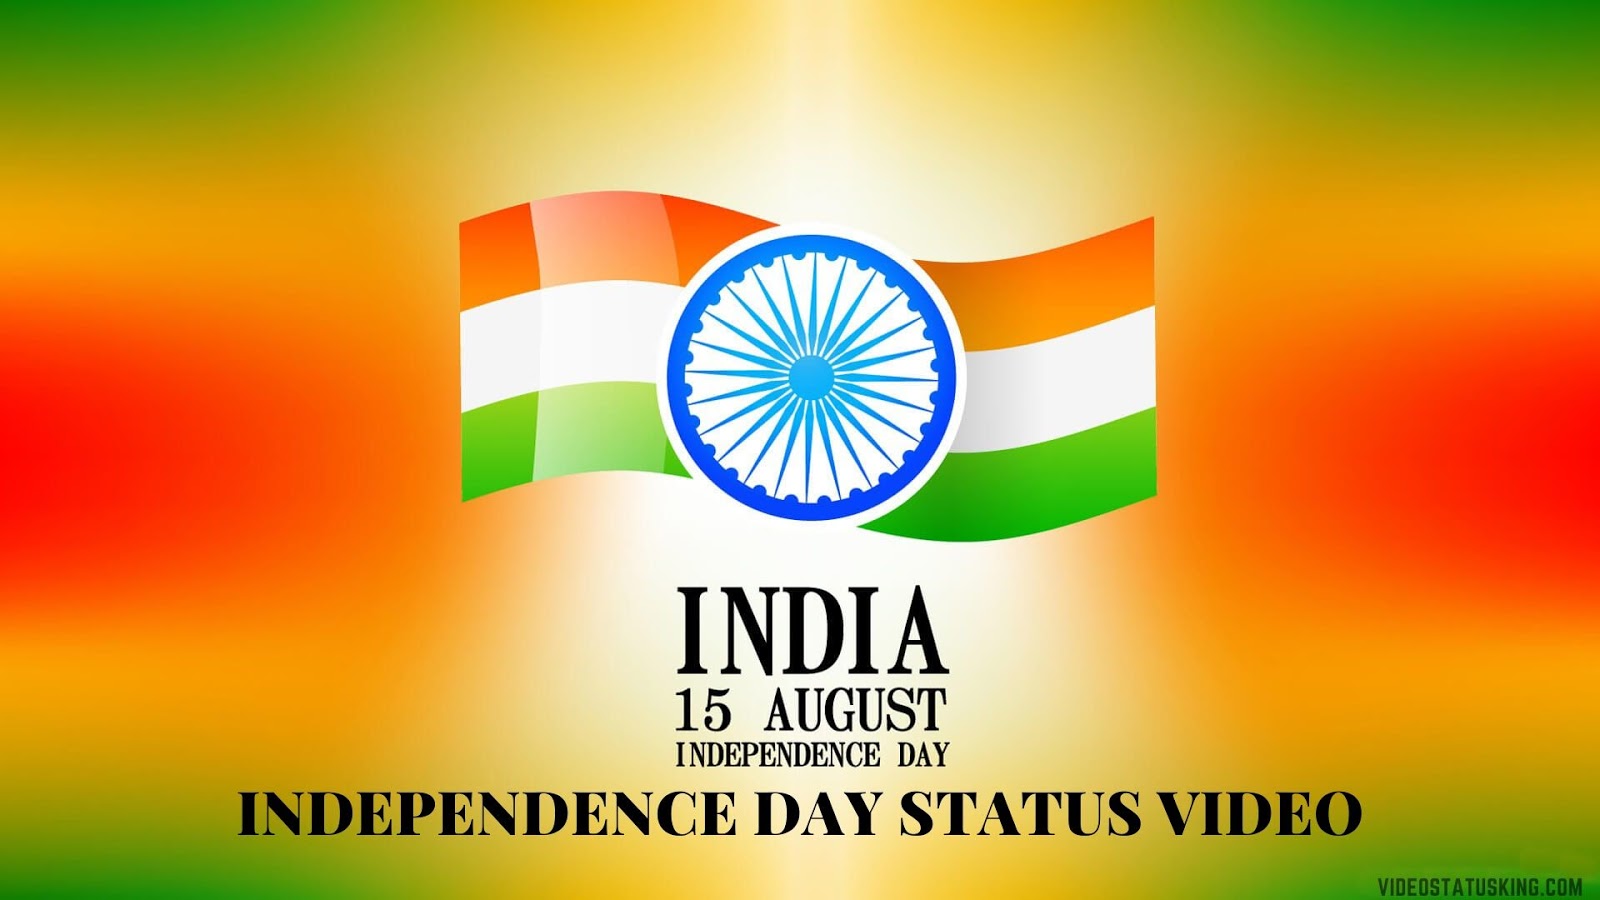 Independence Day Status Videos Download 15 August Status Videos 2020 Crowdsourced material from millions edited with documentary footage from india on 10th october 2015 make this lyrical portrait of a country. independence day status videos download